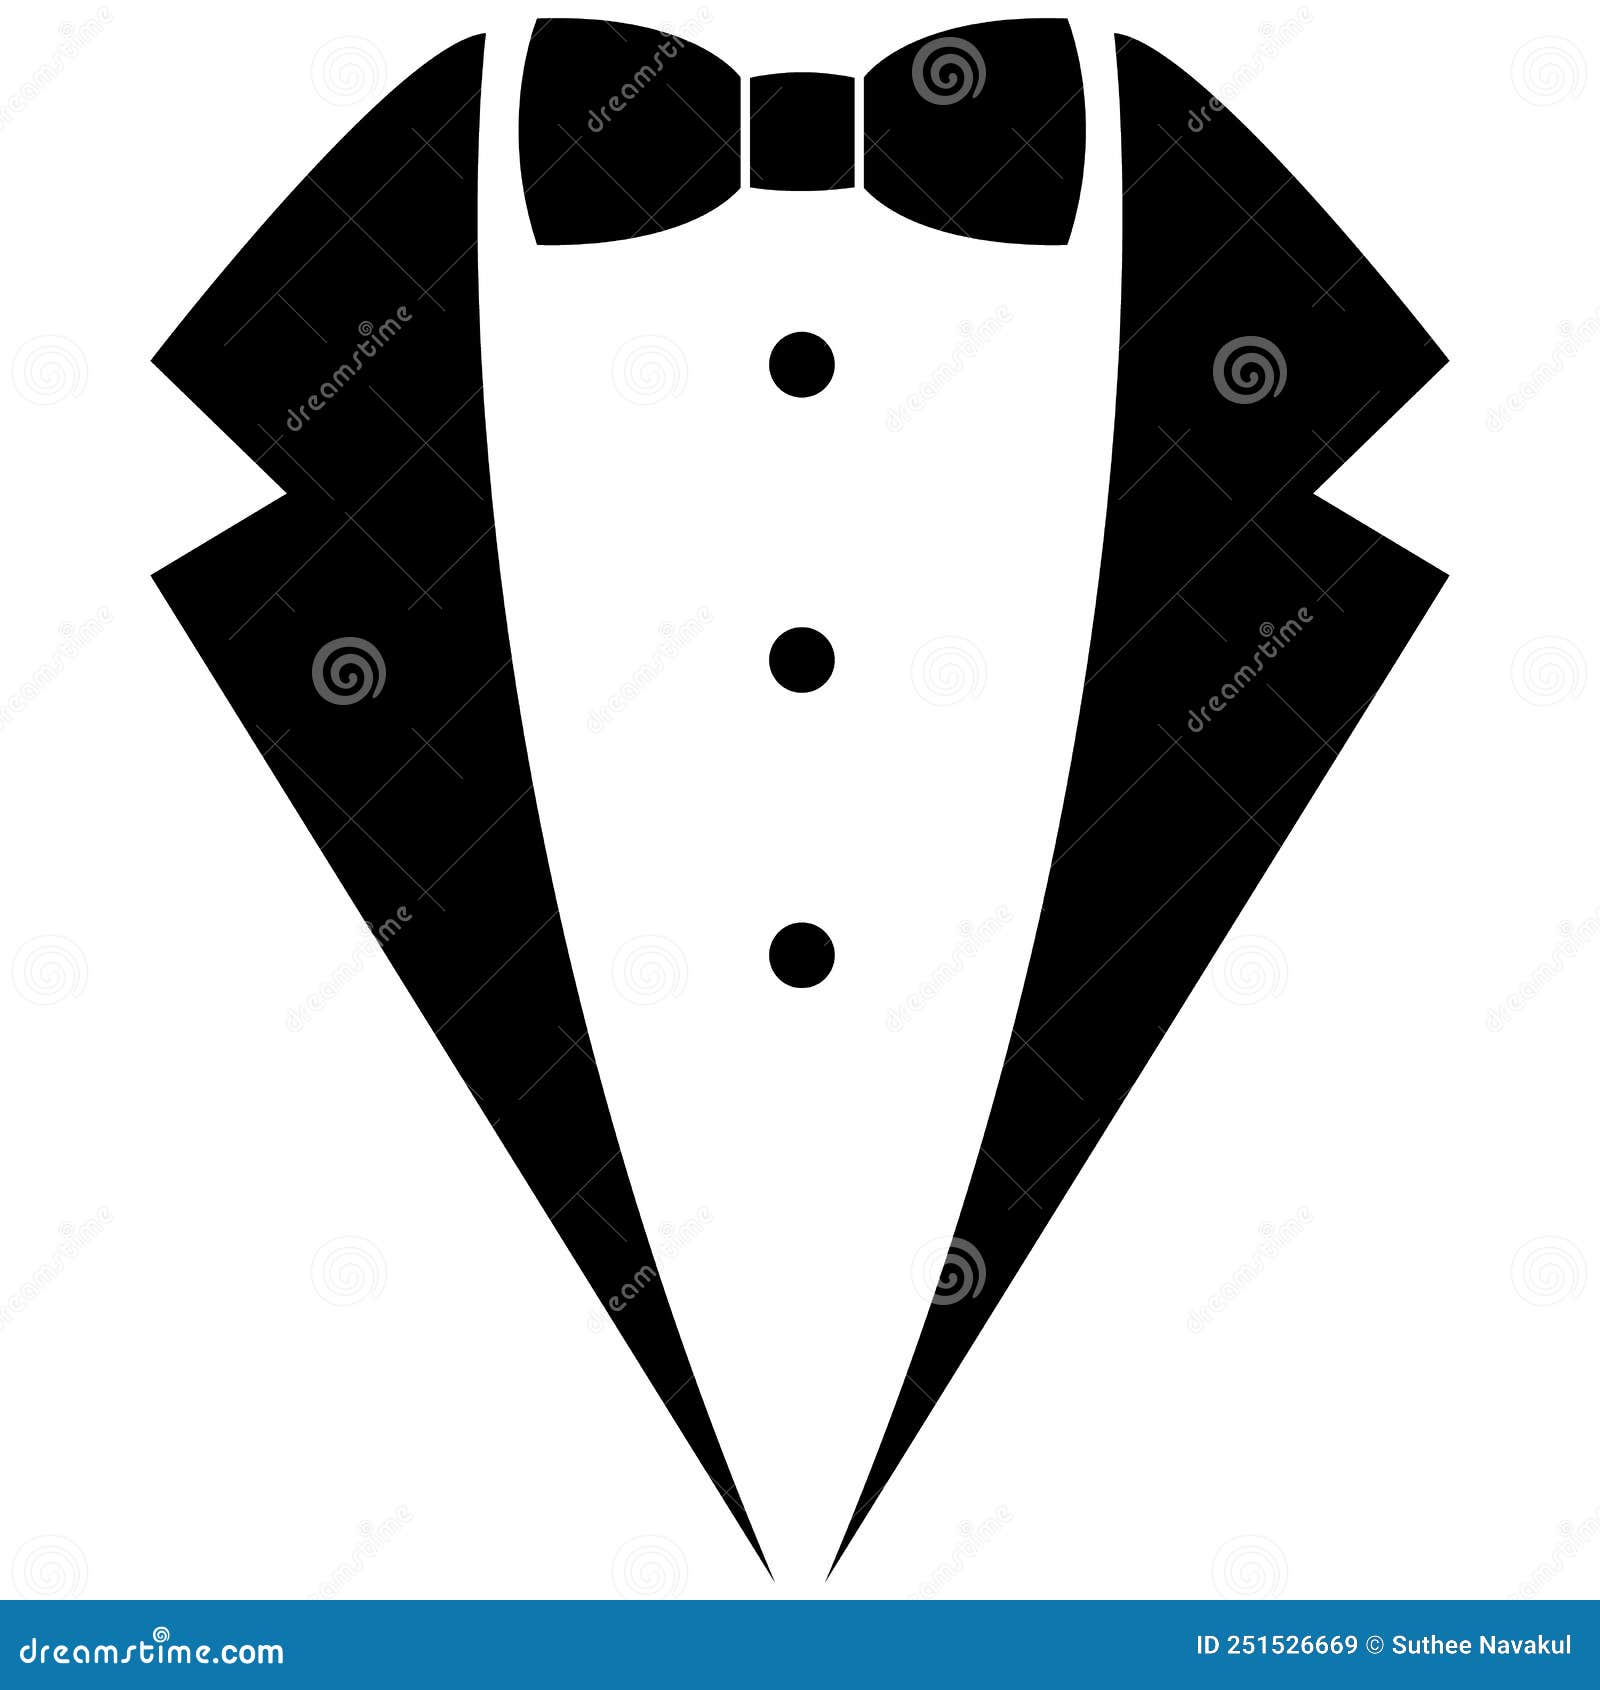 Waiter Suit Icon on White Background. Tuxedo and Bow Tie Sign. Tie ...